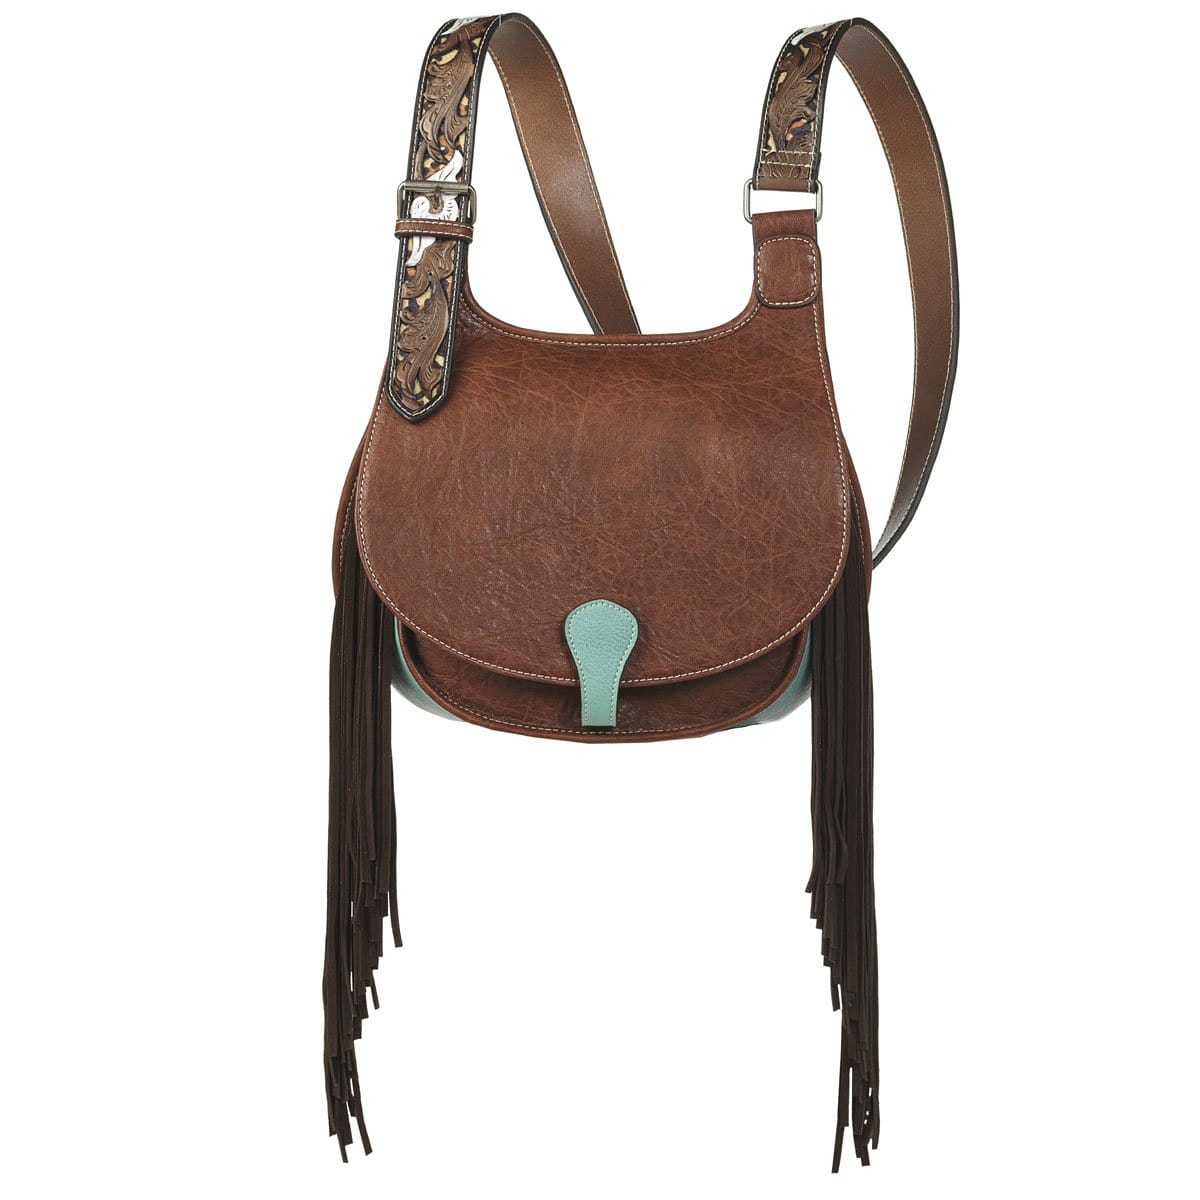 Western cowhide fringe purses, bags & conceal carry for women